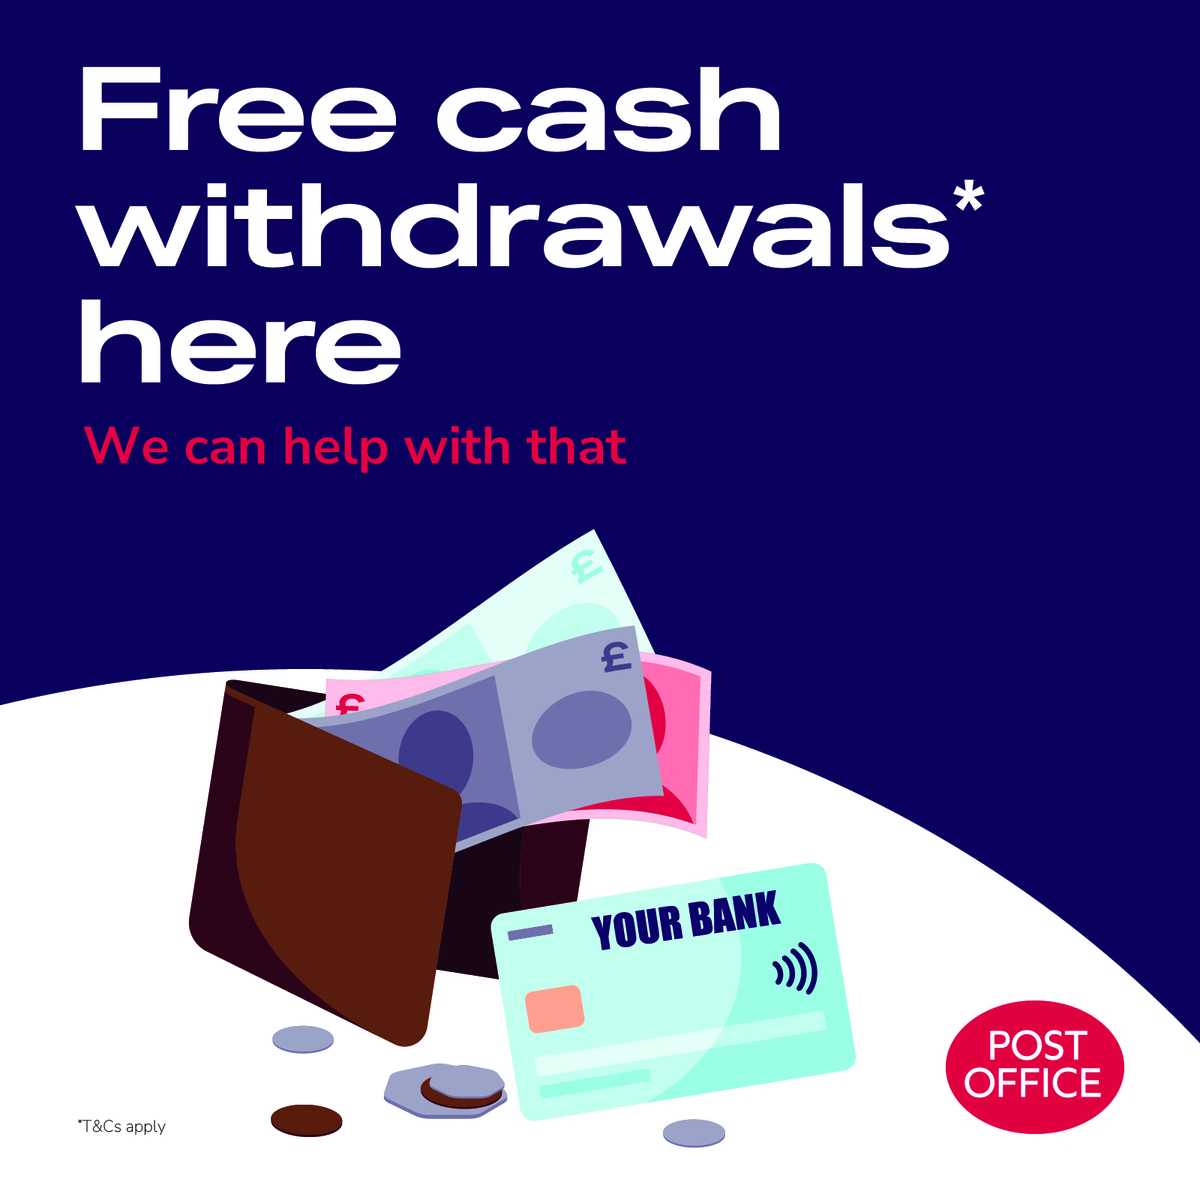 However much you need, pounds or pence, access your bank from here. 💷👛⬇️​

*Some banks may charge for selected services, please speak to your bank for details. Some restrictions apply.​ #AccessToCash #WeCanHelpWithThat